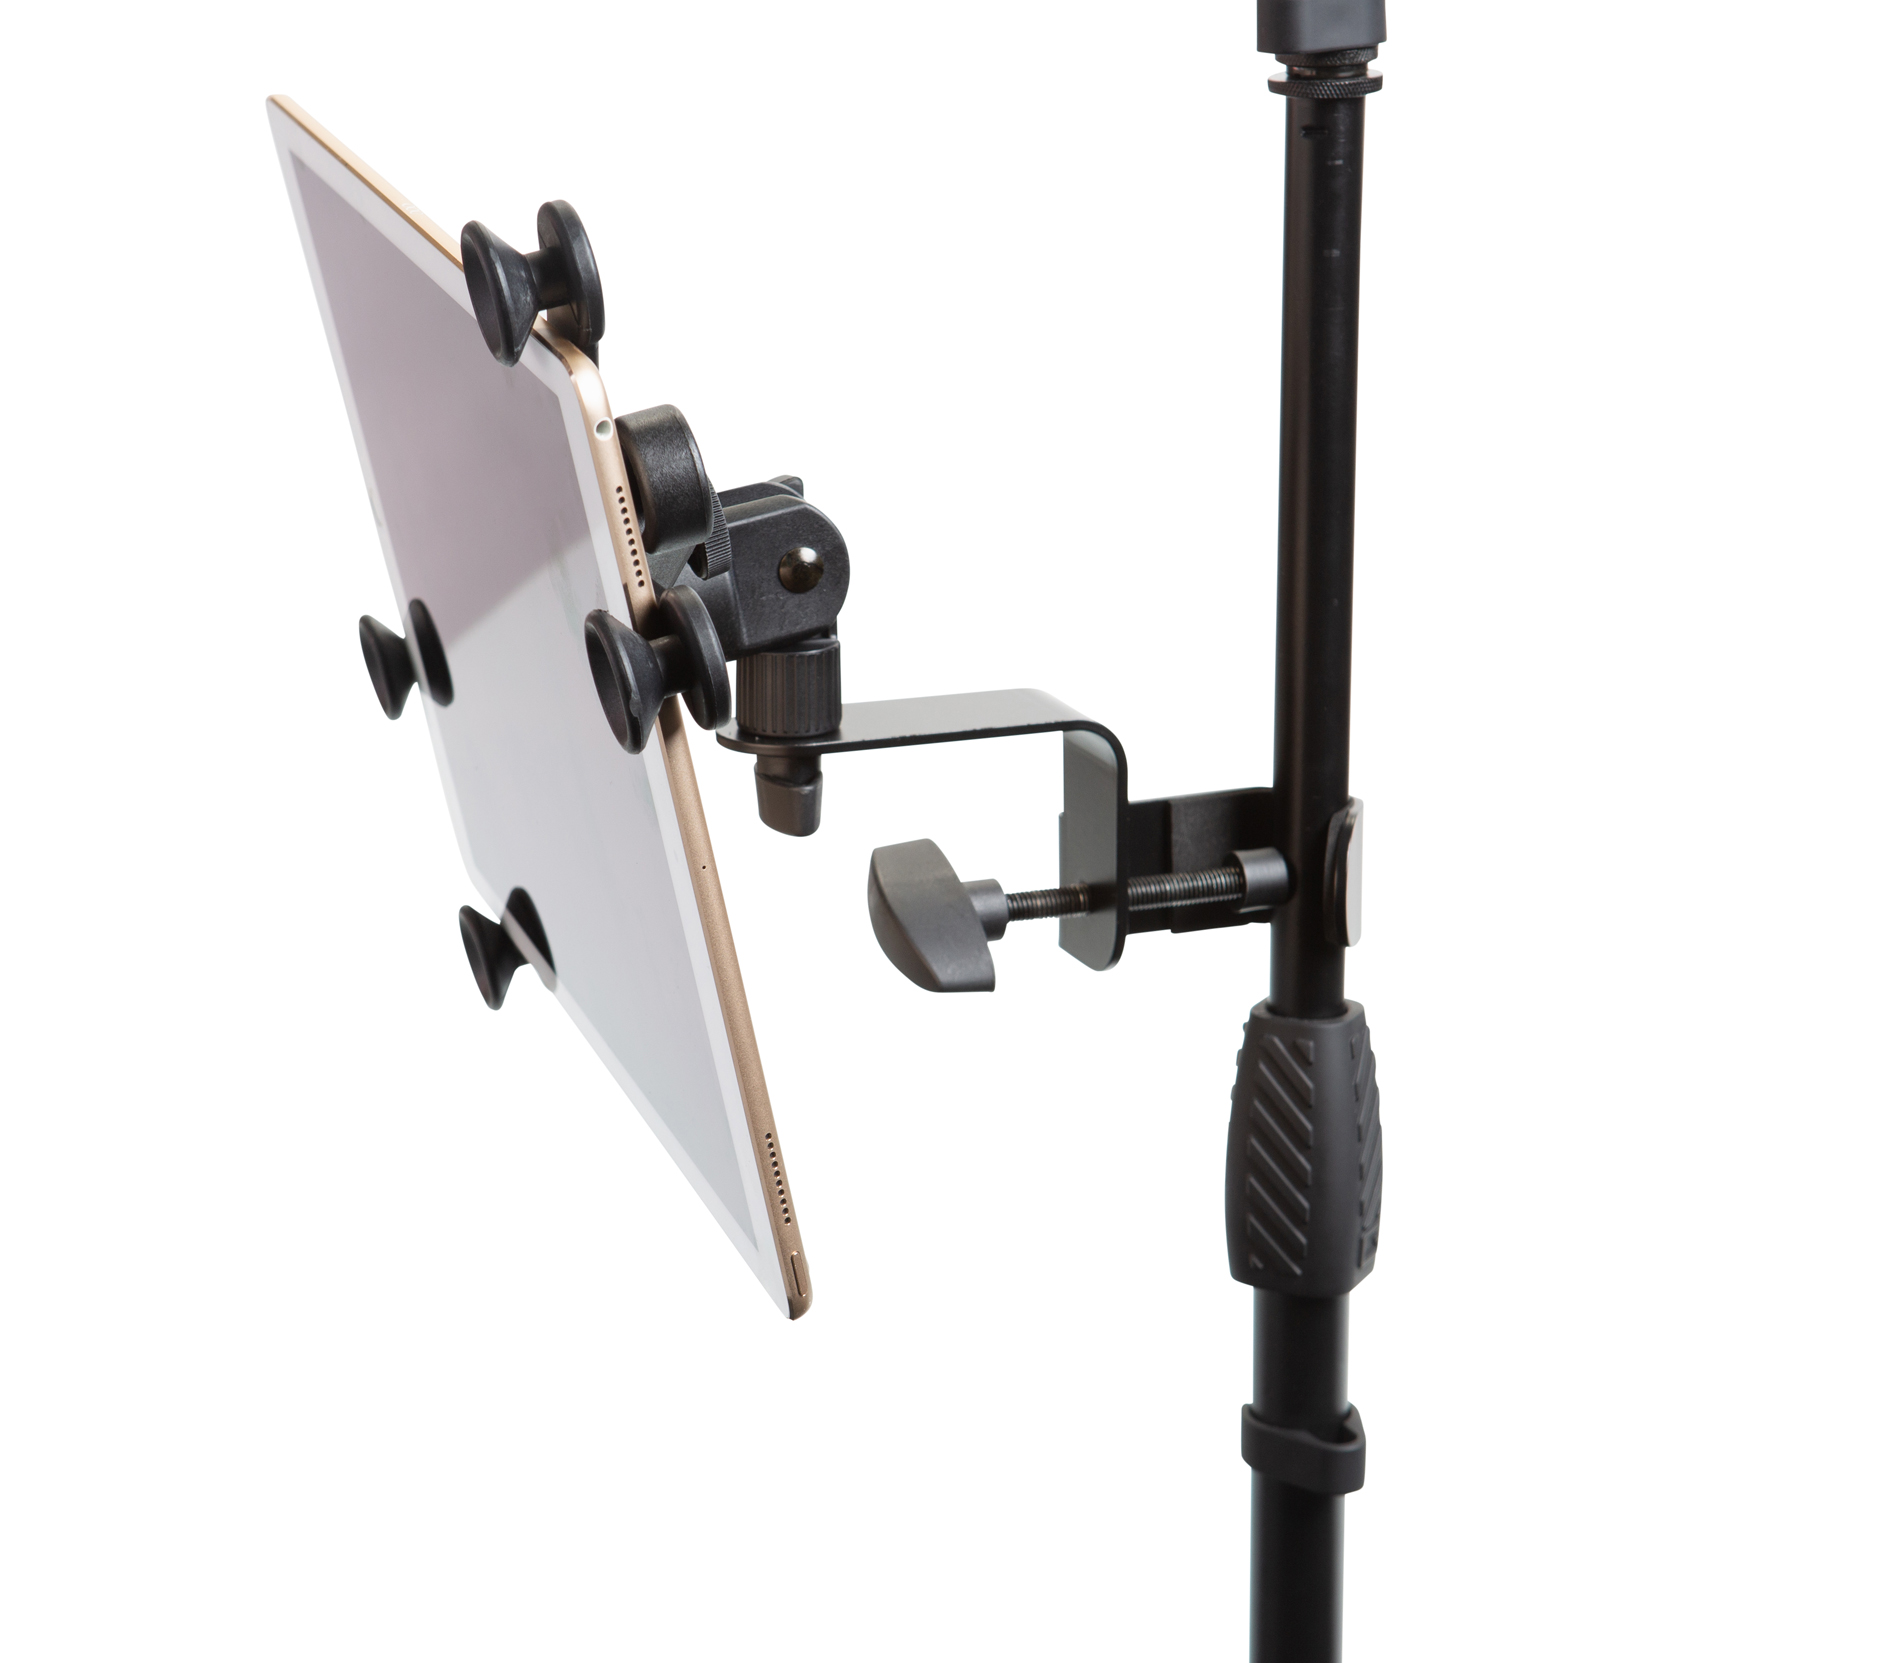 Universal Tablet Clamping Mount W/ 2-Point System-GFW-TABLET1000